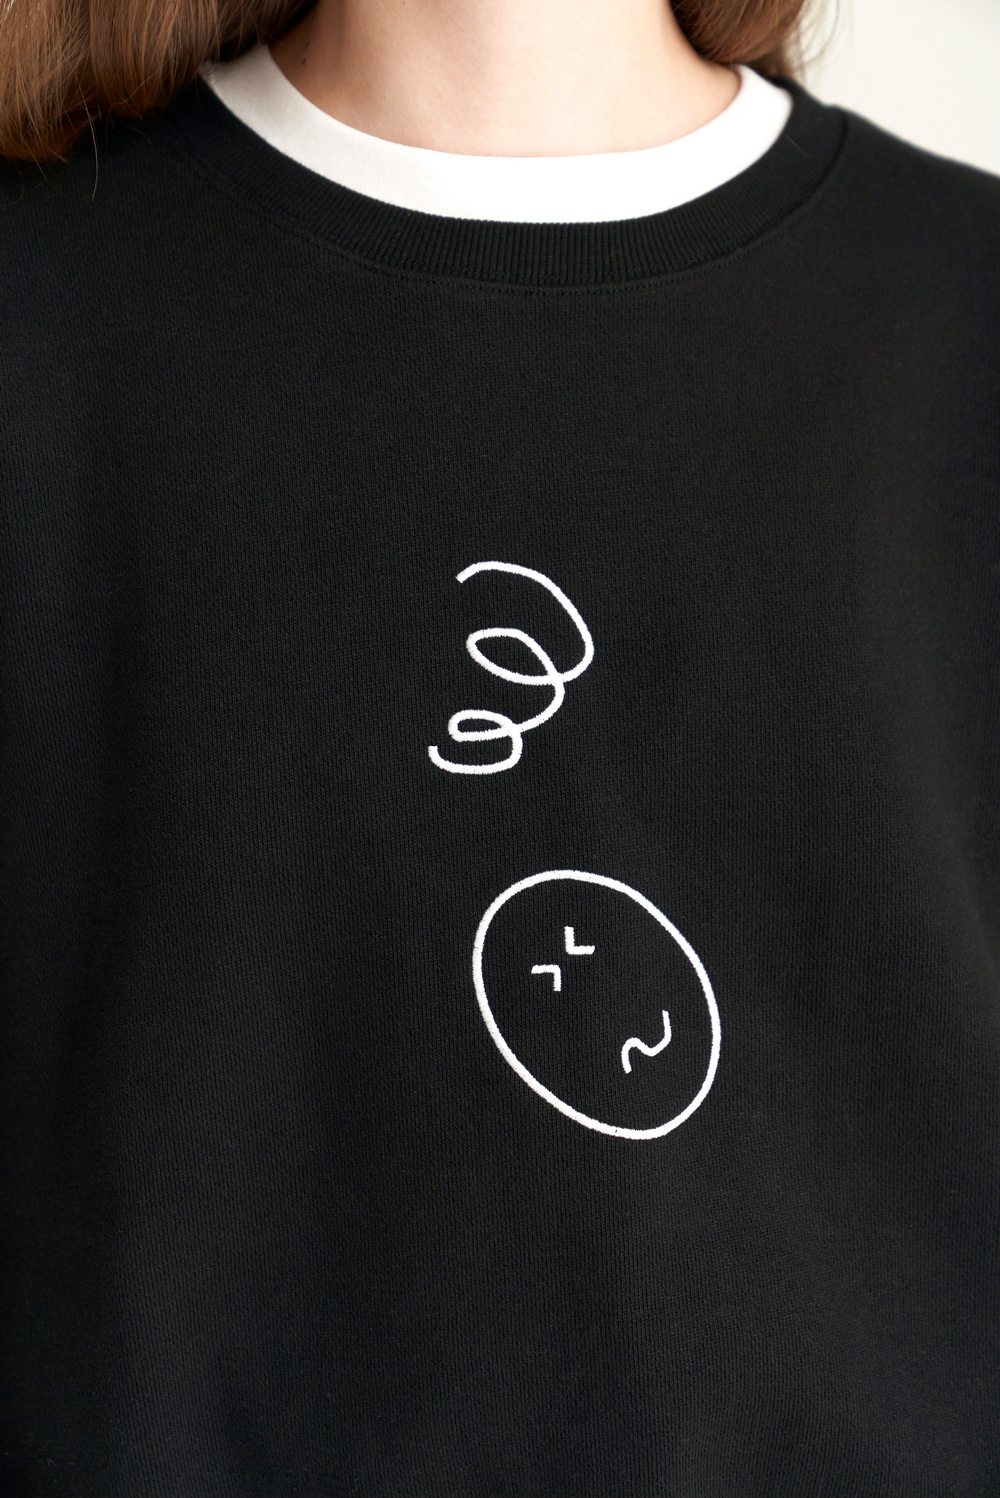 long sleeved tee detail image-S4L2